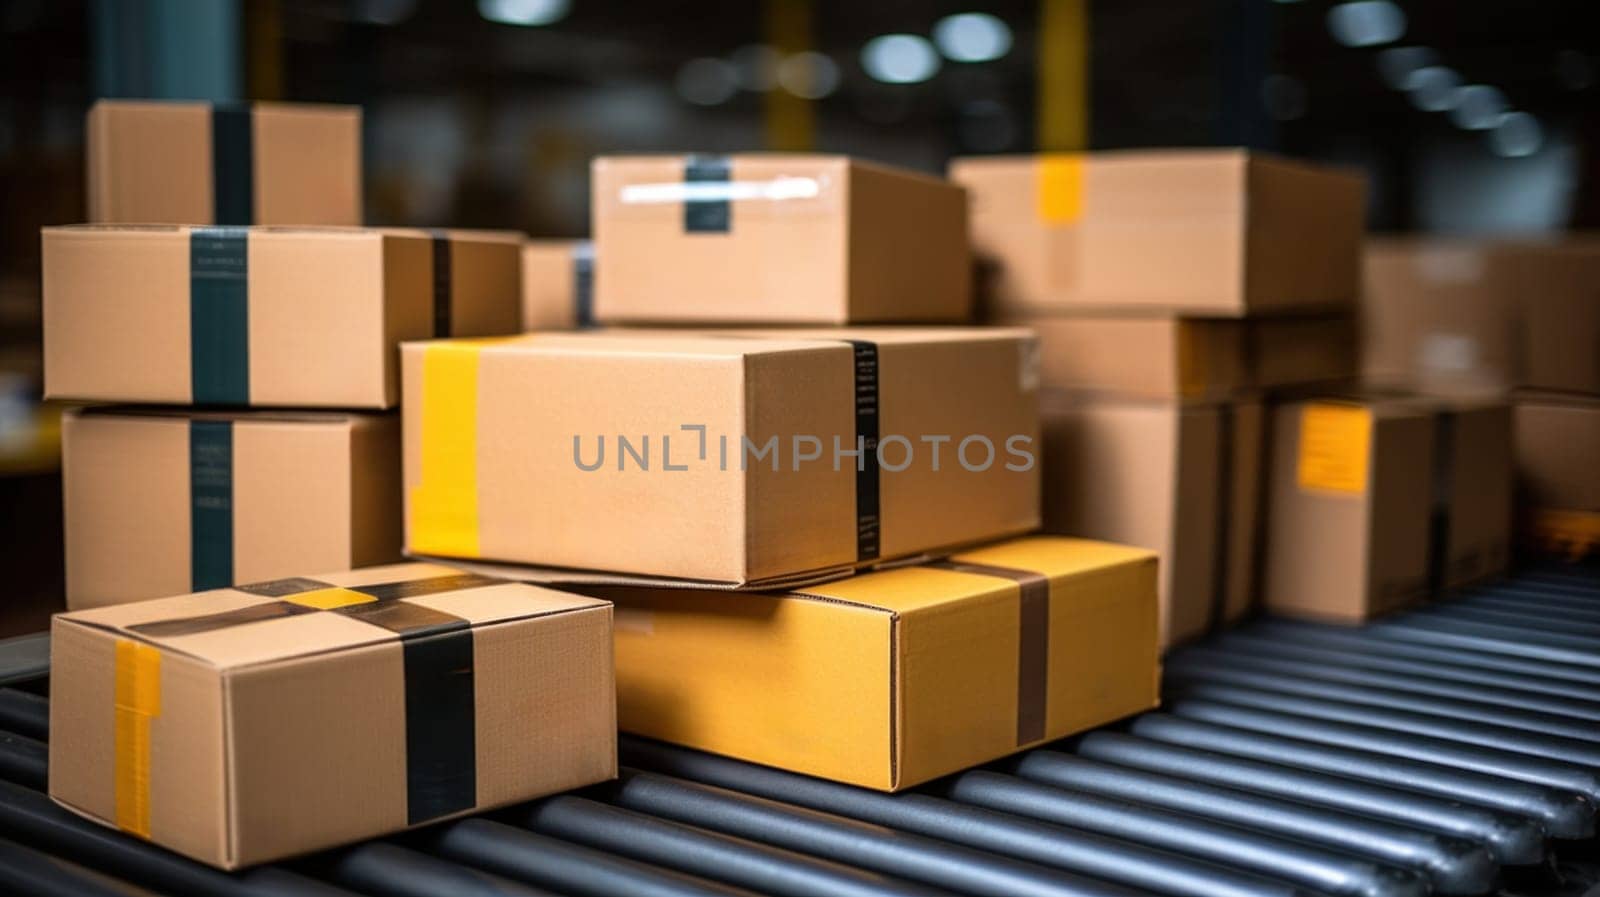 A conveyor belt with boxes stacked on it in a warehouse